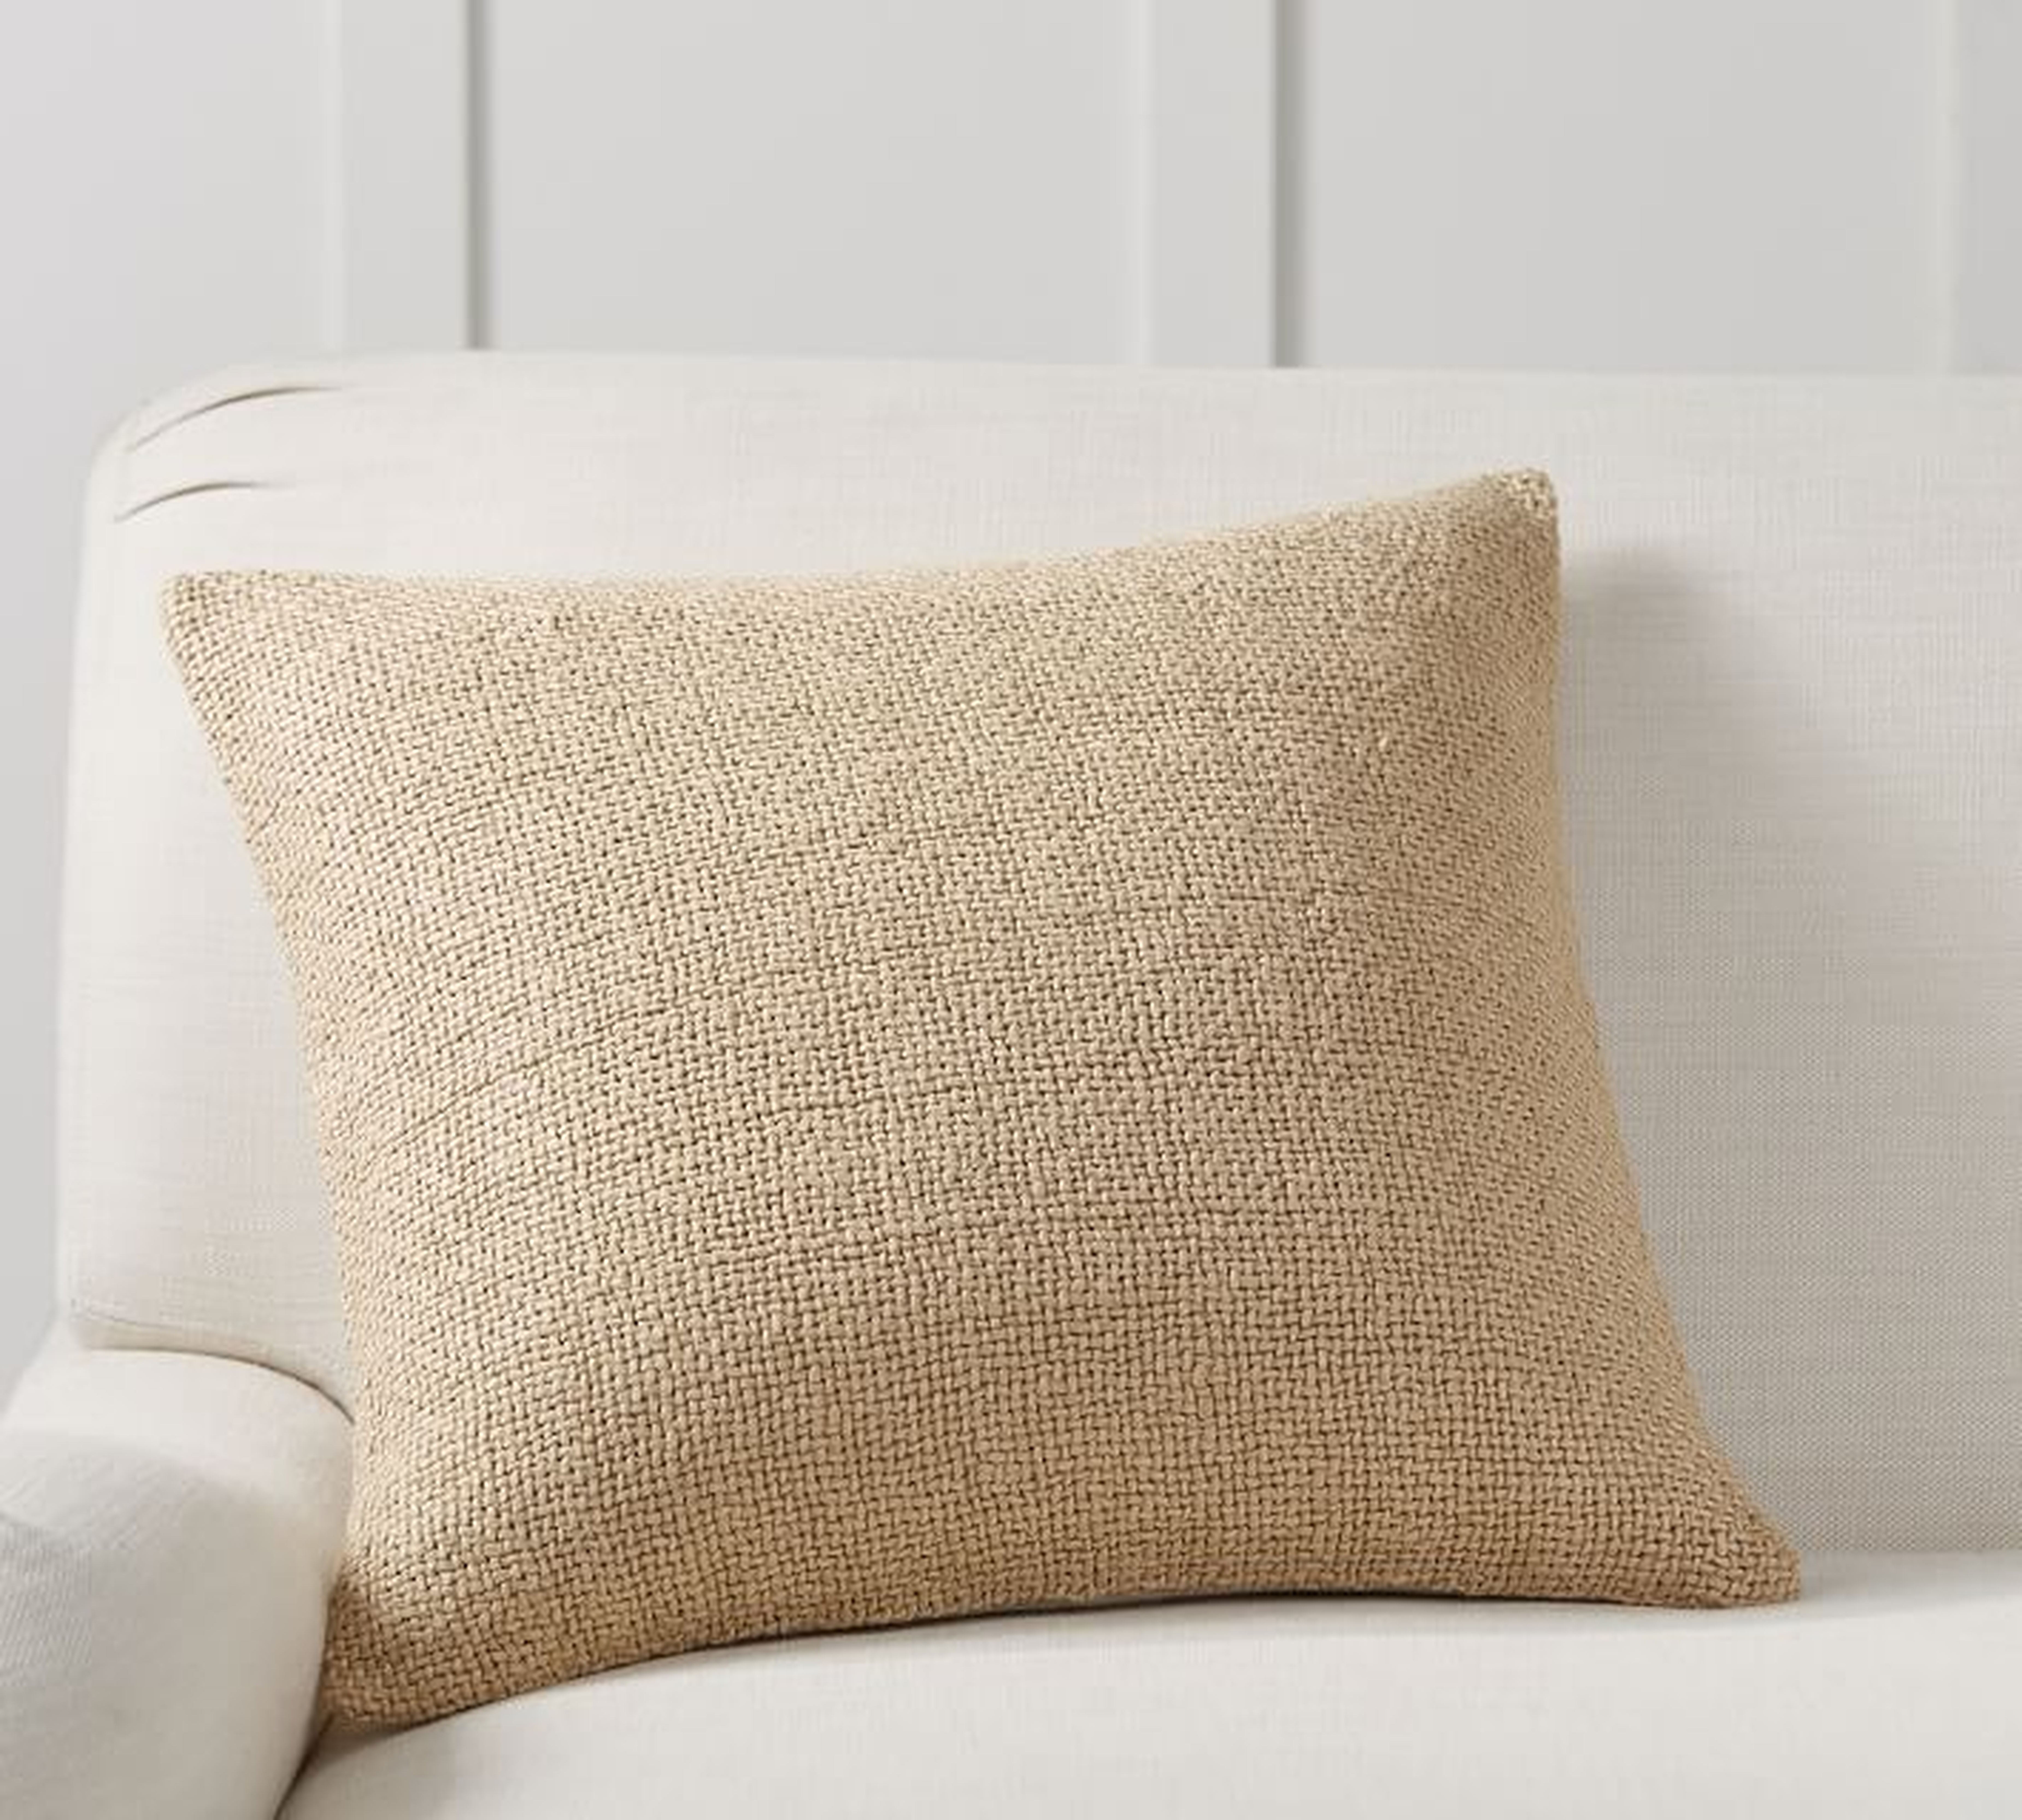 Faye Textured Linen Pillow Cover, 20", Flax - Pottery Barn